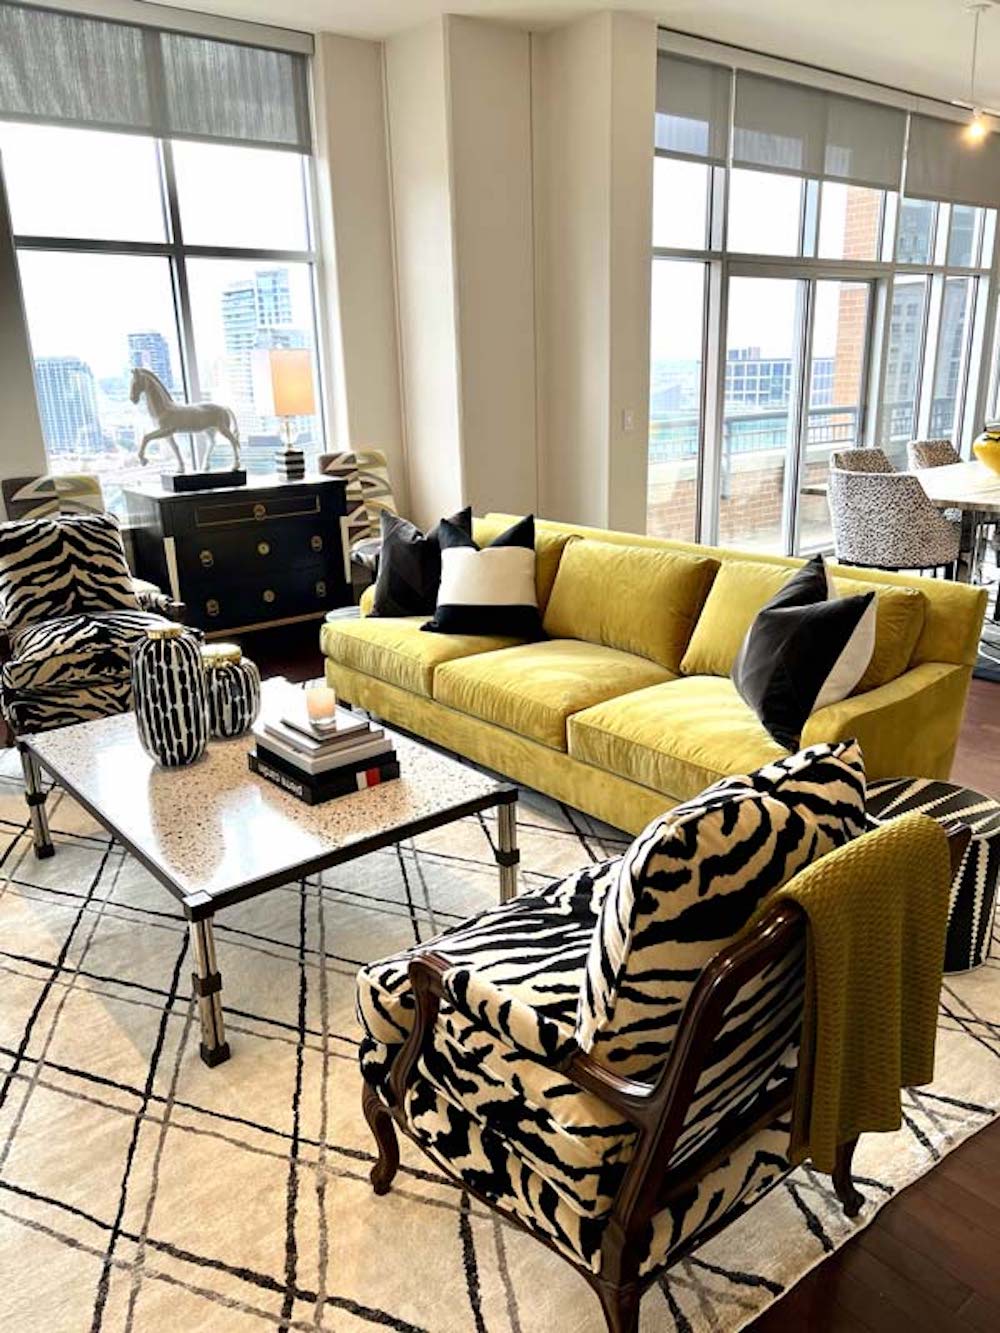 Lots of light in this living room with a yellow sofa and animal print fabric chair